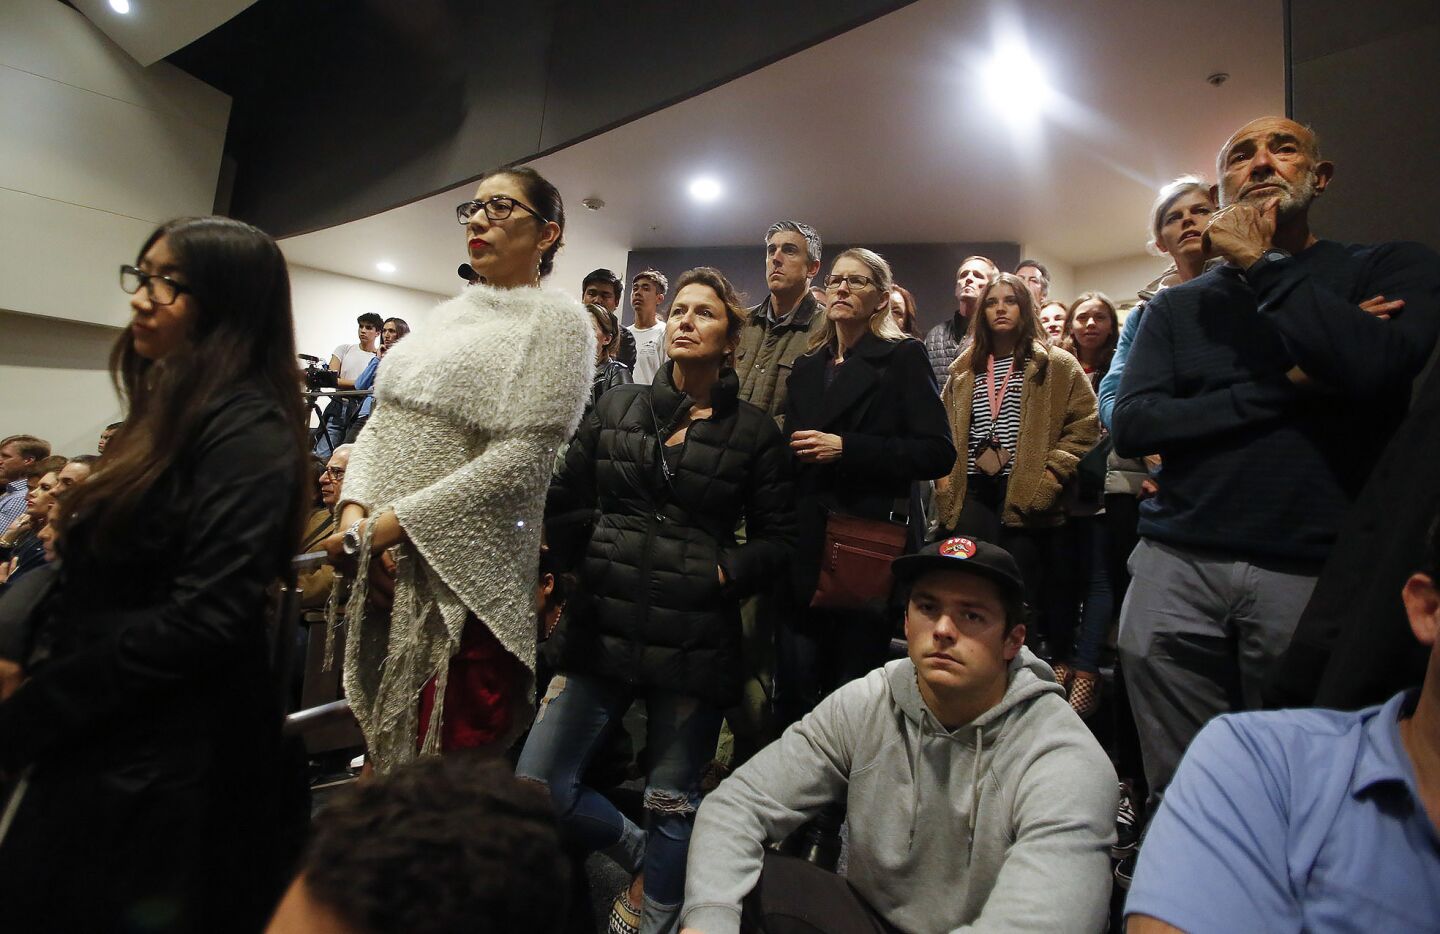 Students, parents and other members of the community listen to a town hall-style discussion Monday night at Newport Harbor High School concerning pictures that emerged from an off-campus party that showed students saluting a swastika made of red cups.